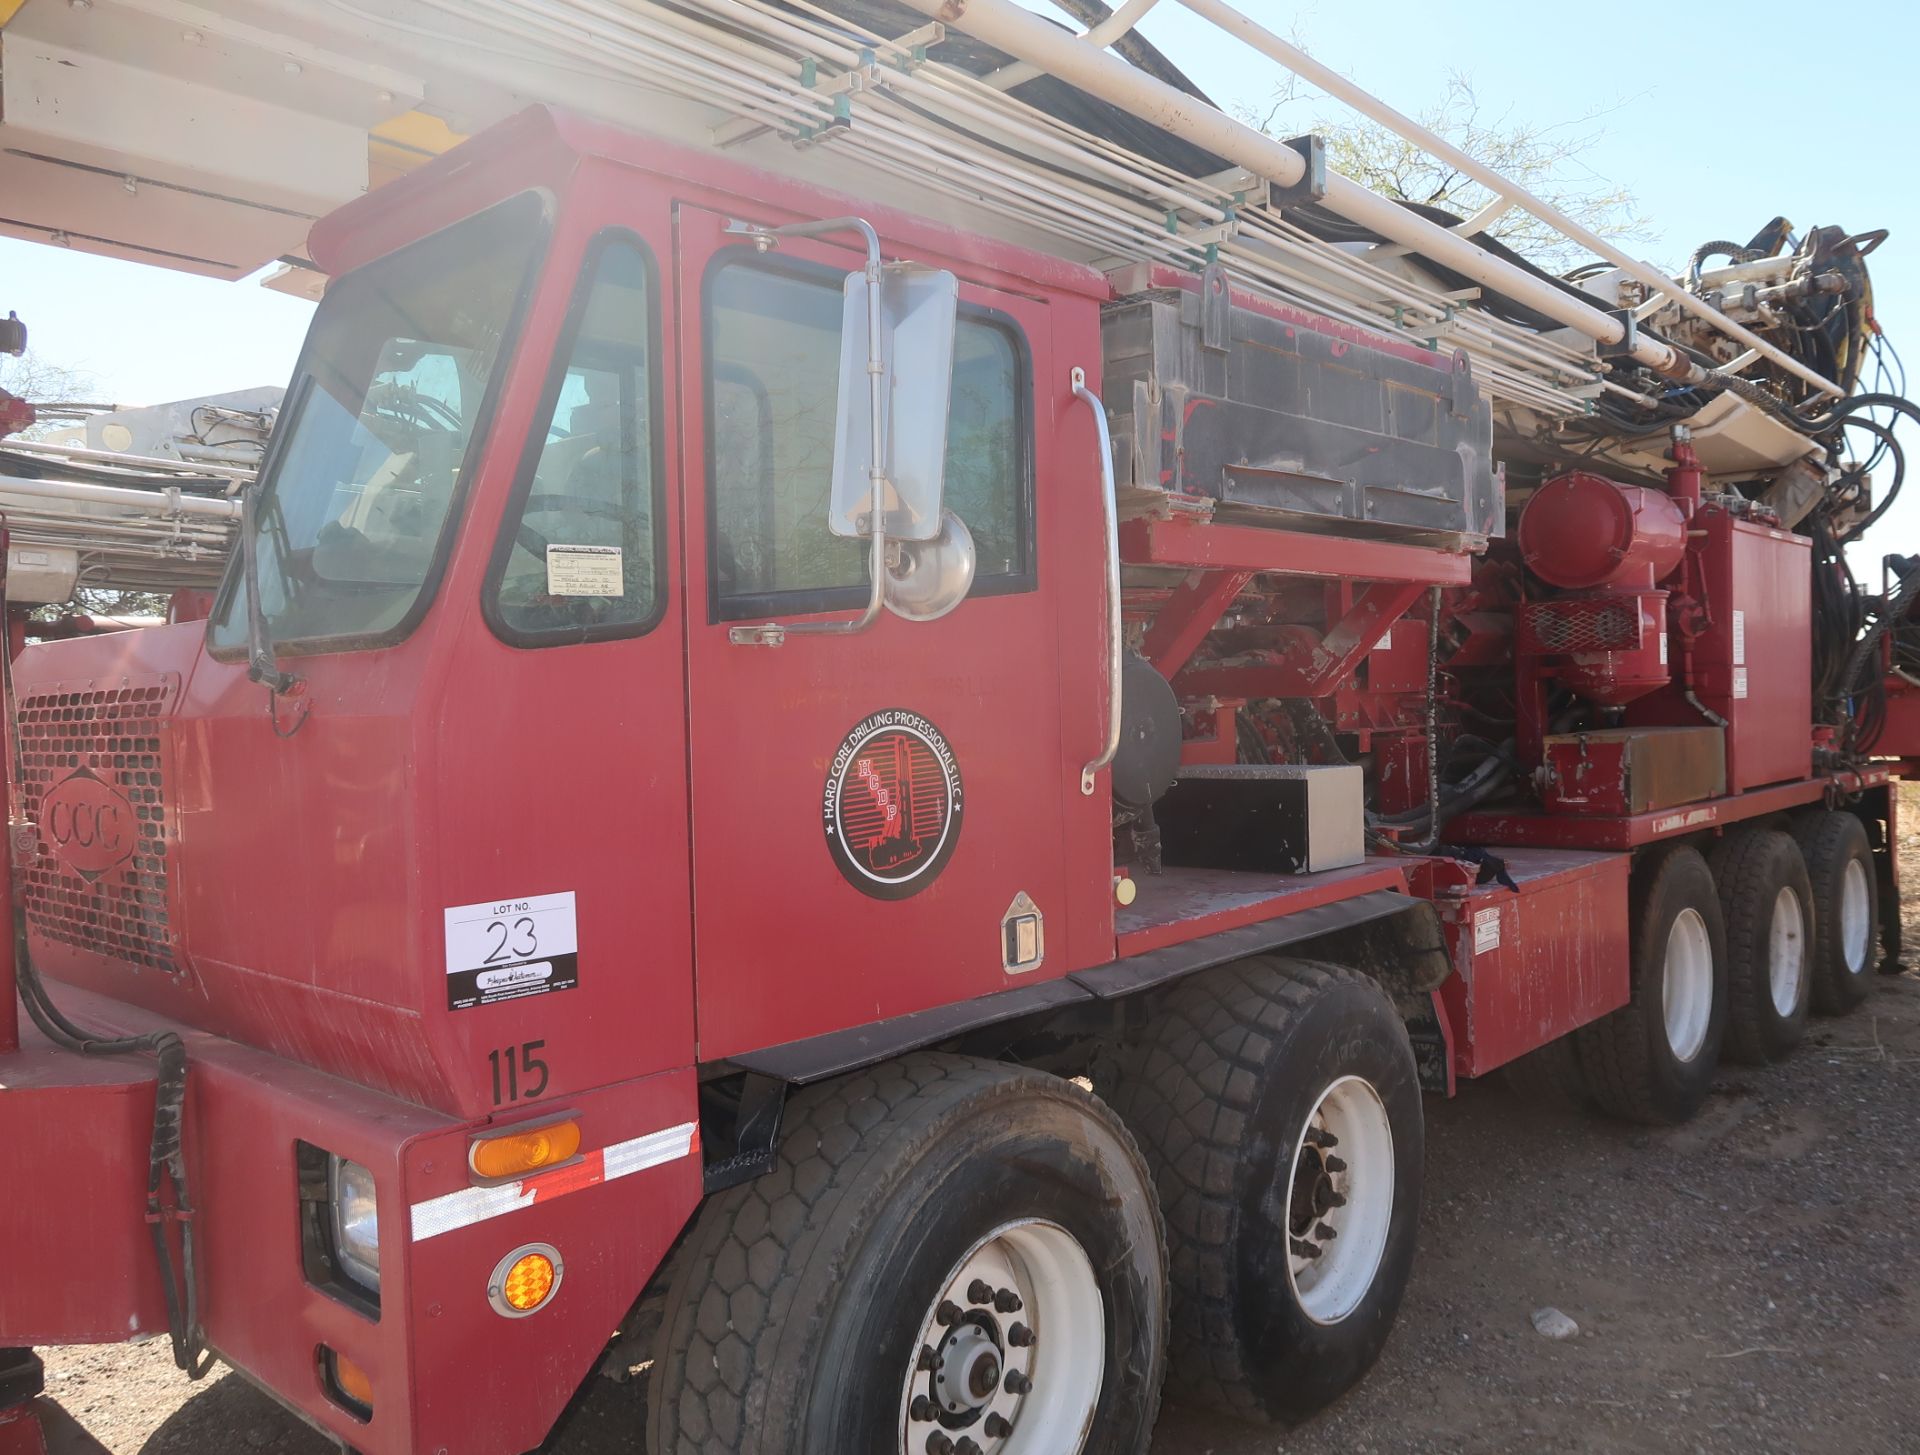 2006 SCHRAMM T-130XD DRILL RIG, SN. J130-0154 MOUNTED ON CRANE CARRIER, VIN. 1CYDGV6846T047562 - Image 4 of 19